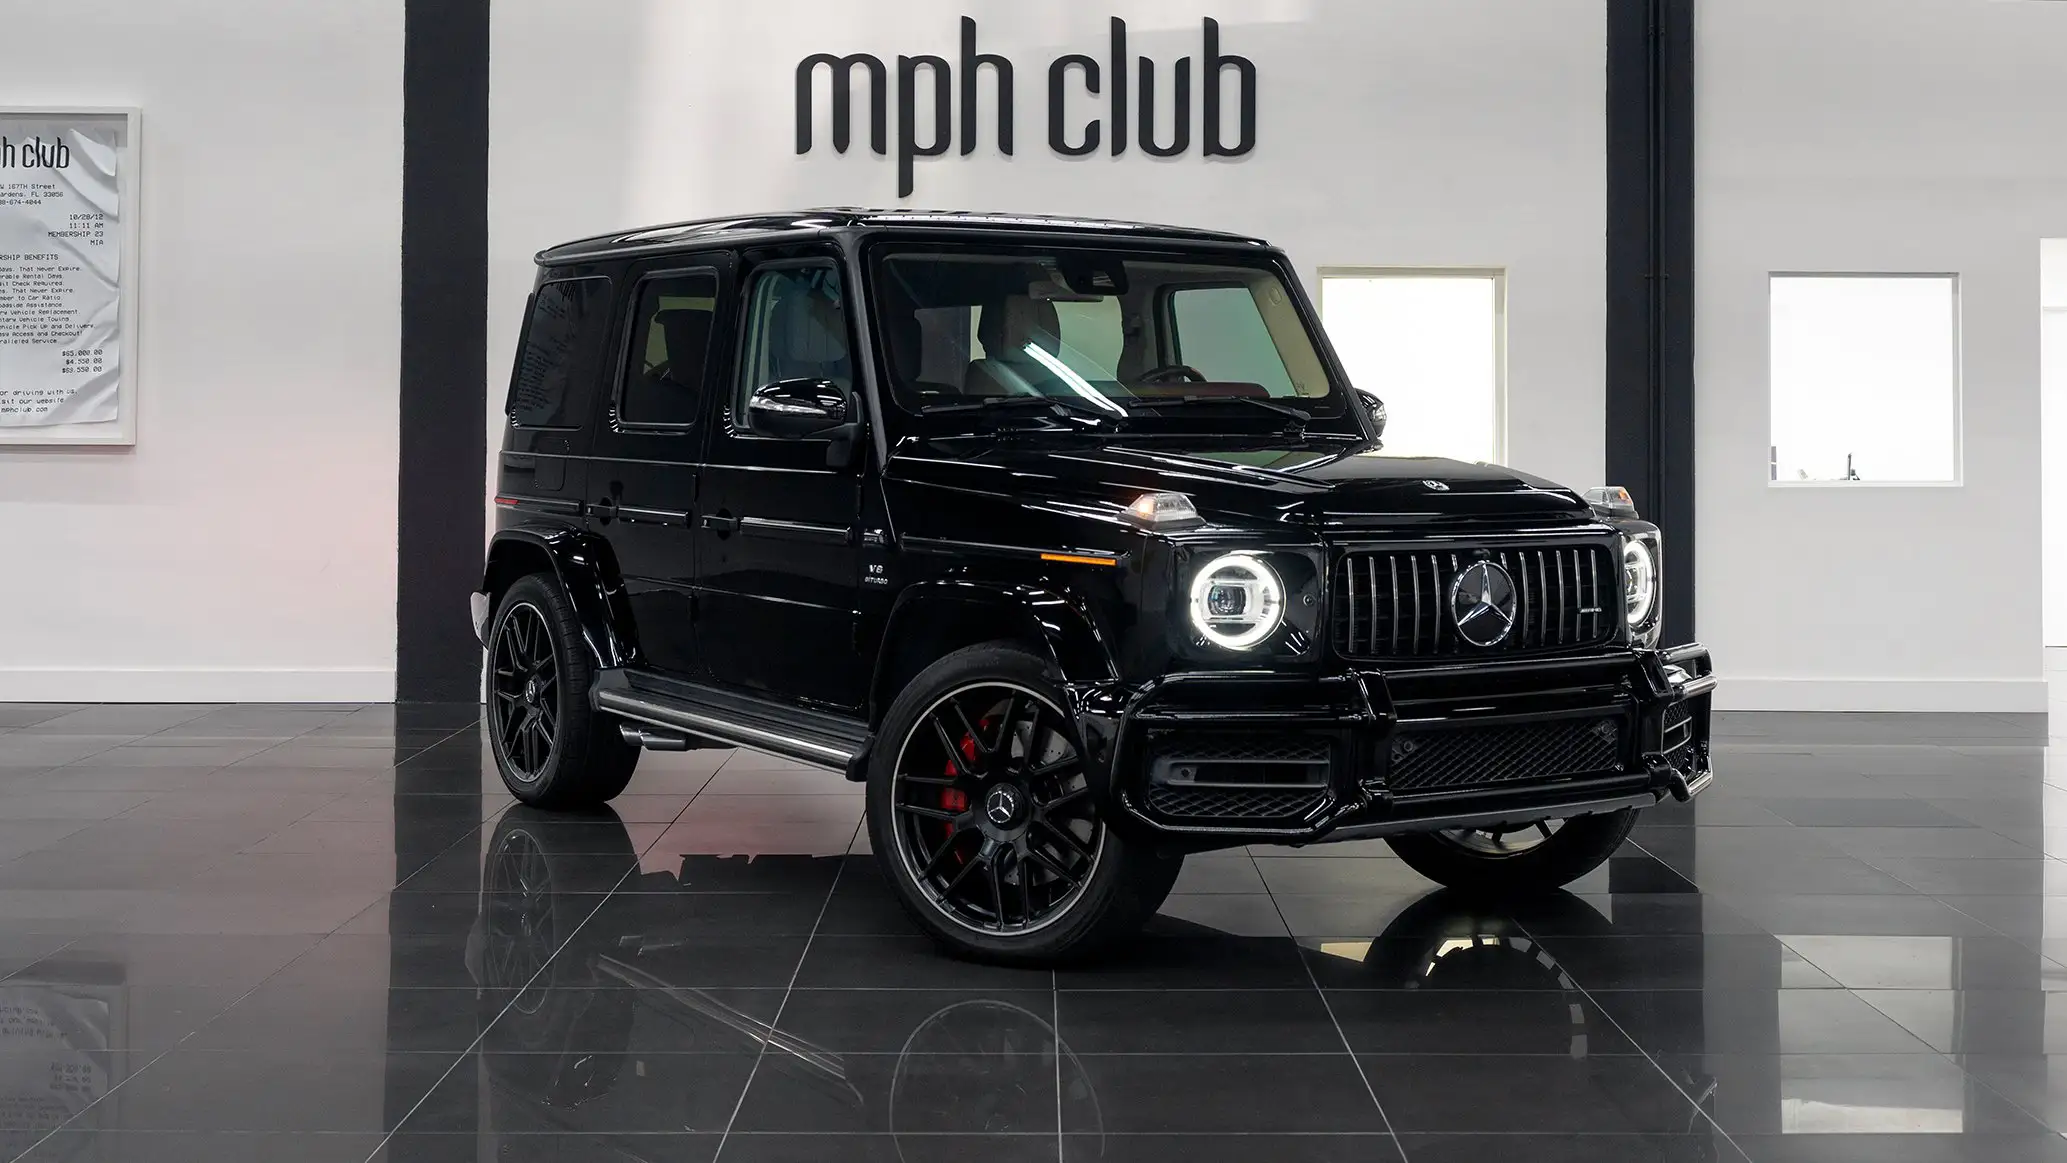 2020 black on white mercedes benz amg g63 for sale mph club 6